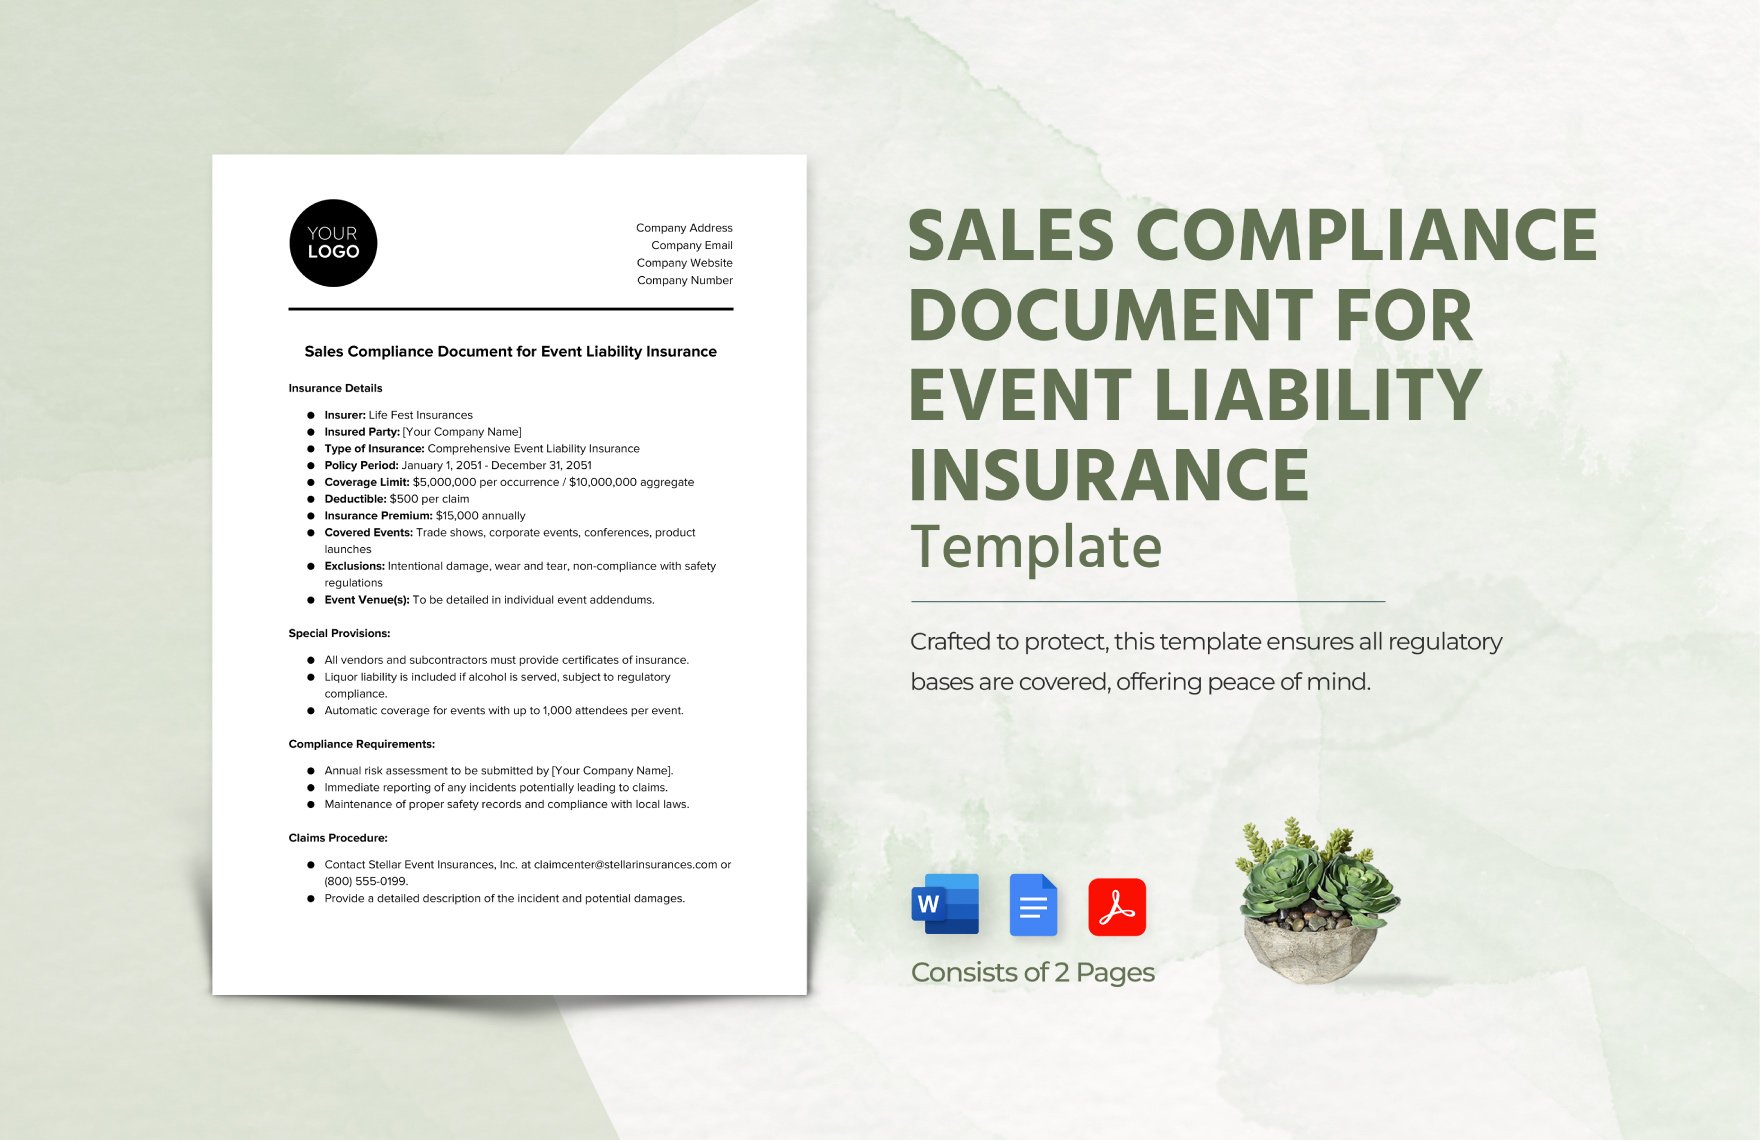 Sales Compliance Document for Event Liability Insurance Template in Word, Google Docs, PDF